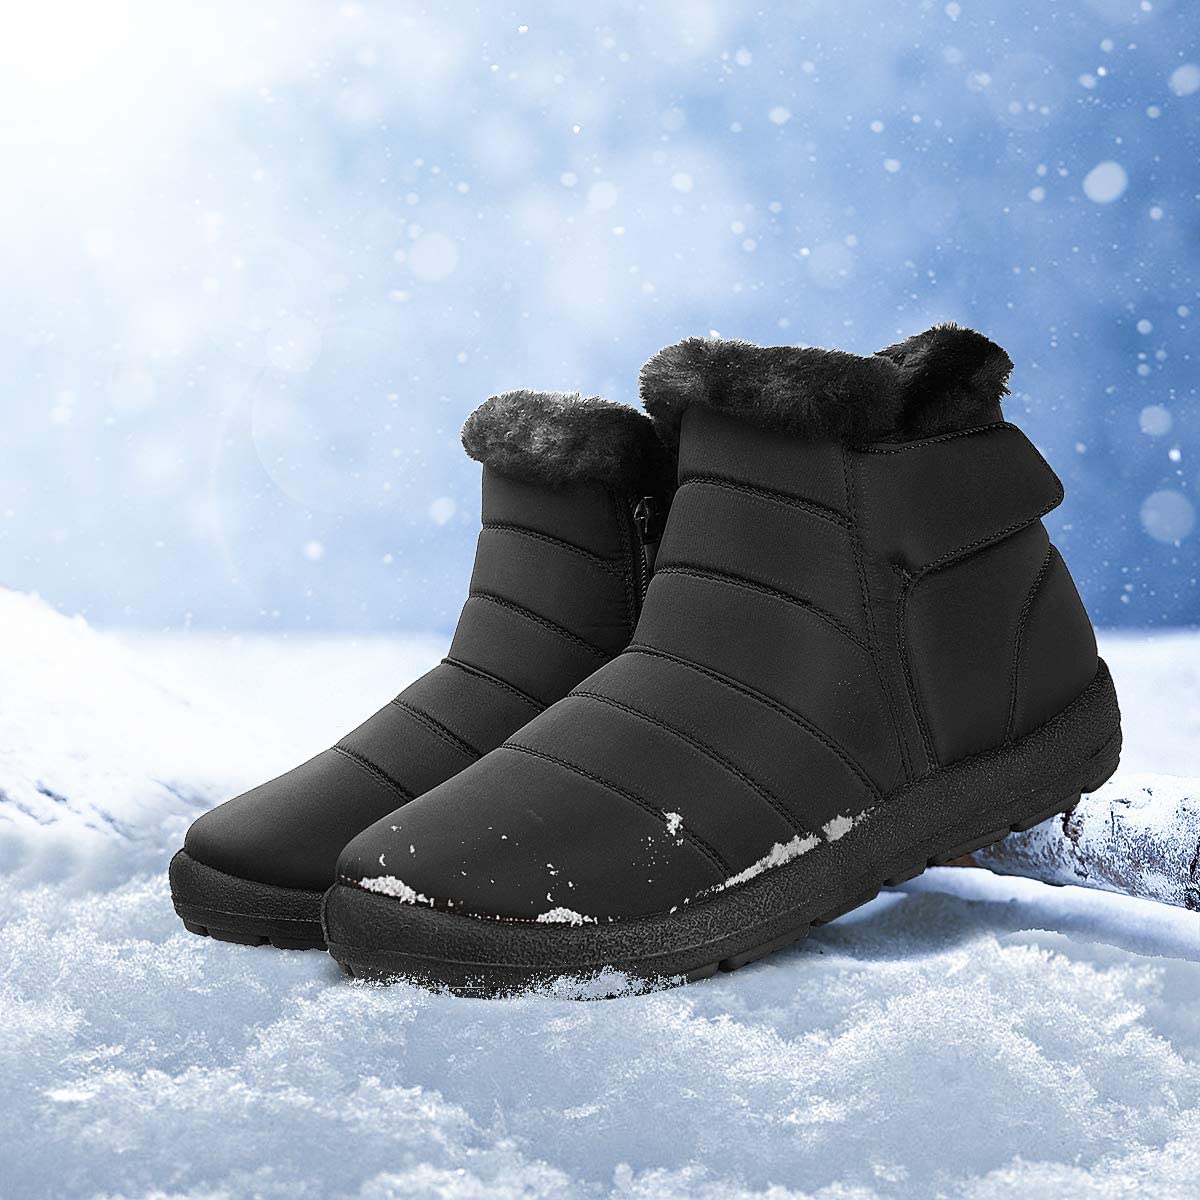 gracosy Warm Snow Boots, Winter Warm Ankle Boots, Fur Lining Boots ...